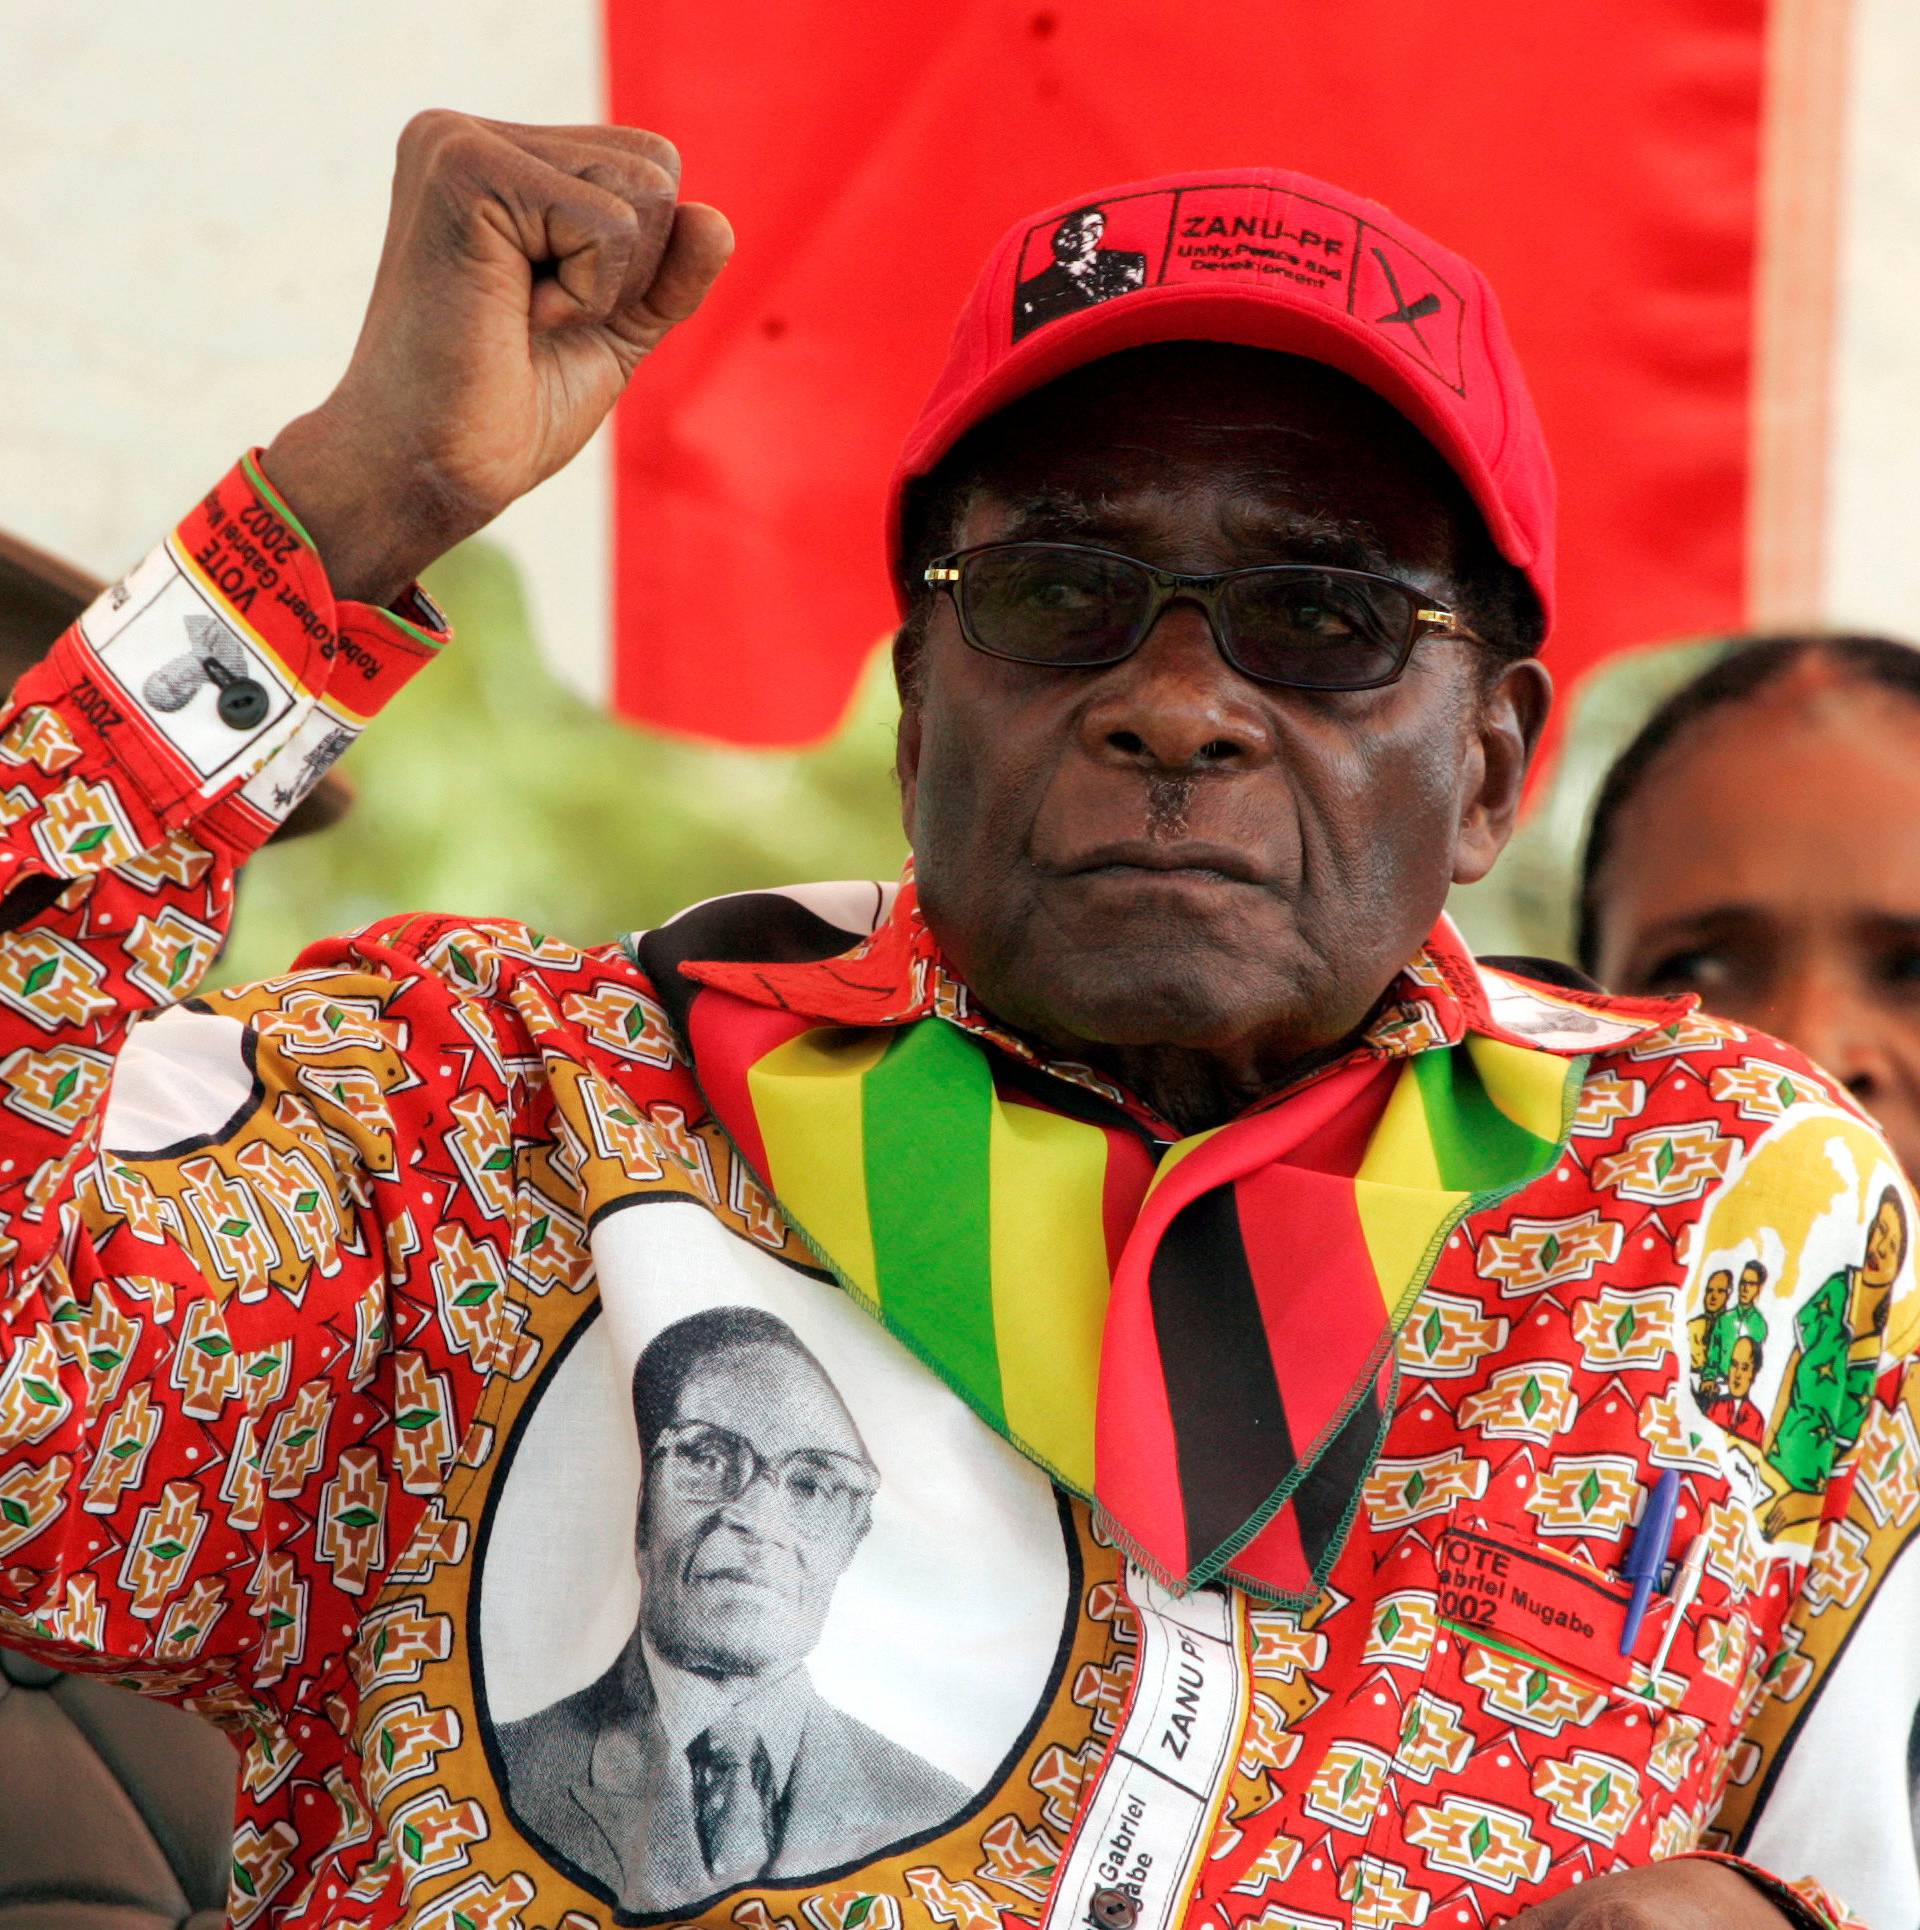 FILE PHOTO -  File photo of Zimbabwe's President Robert Mugabe gesturing at an election rally in the small town of Shamva